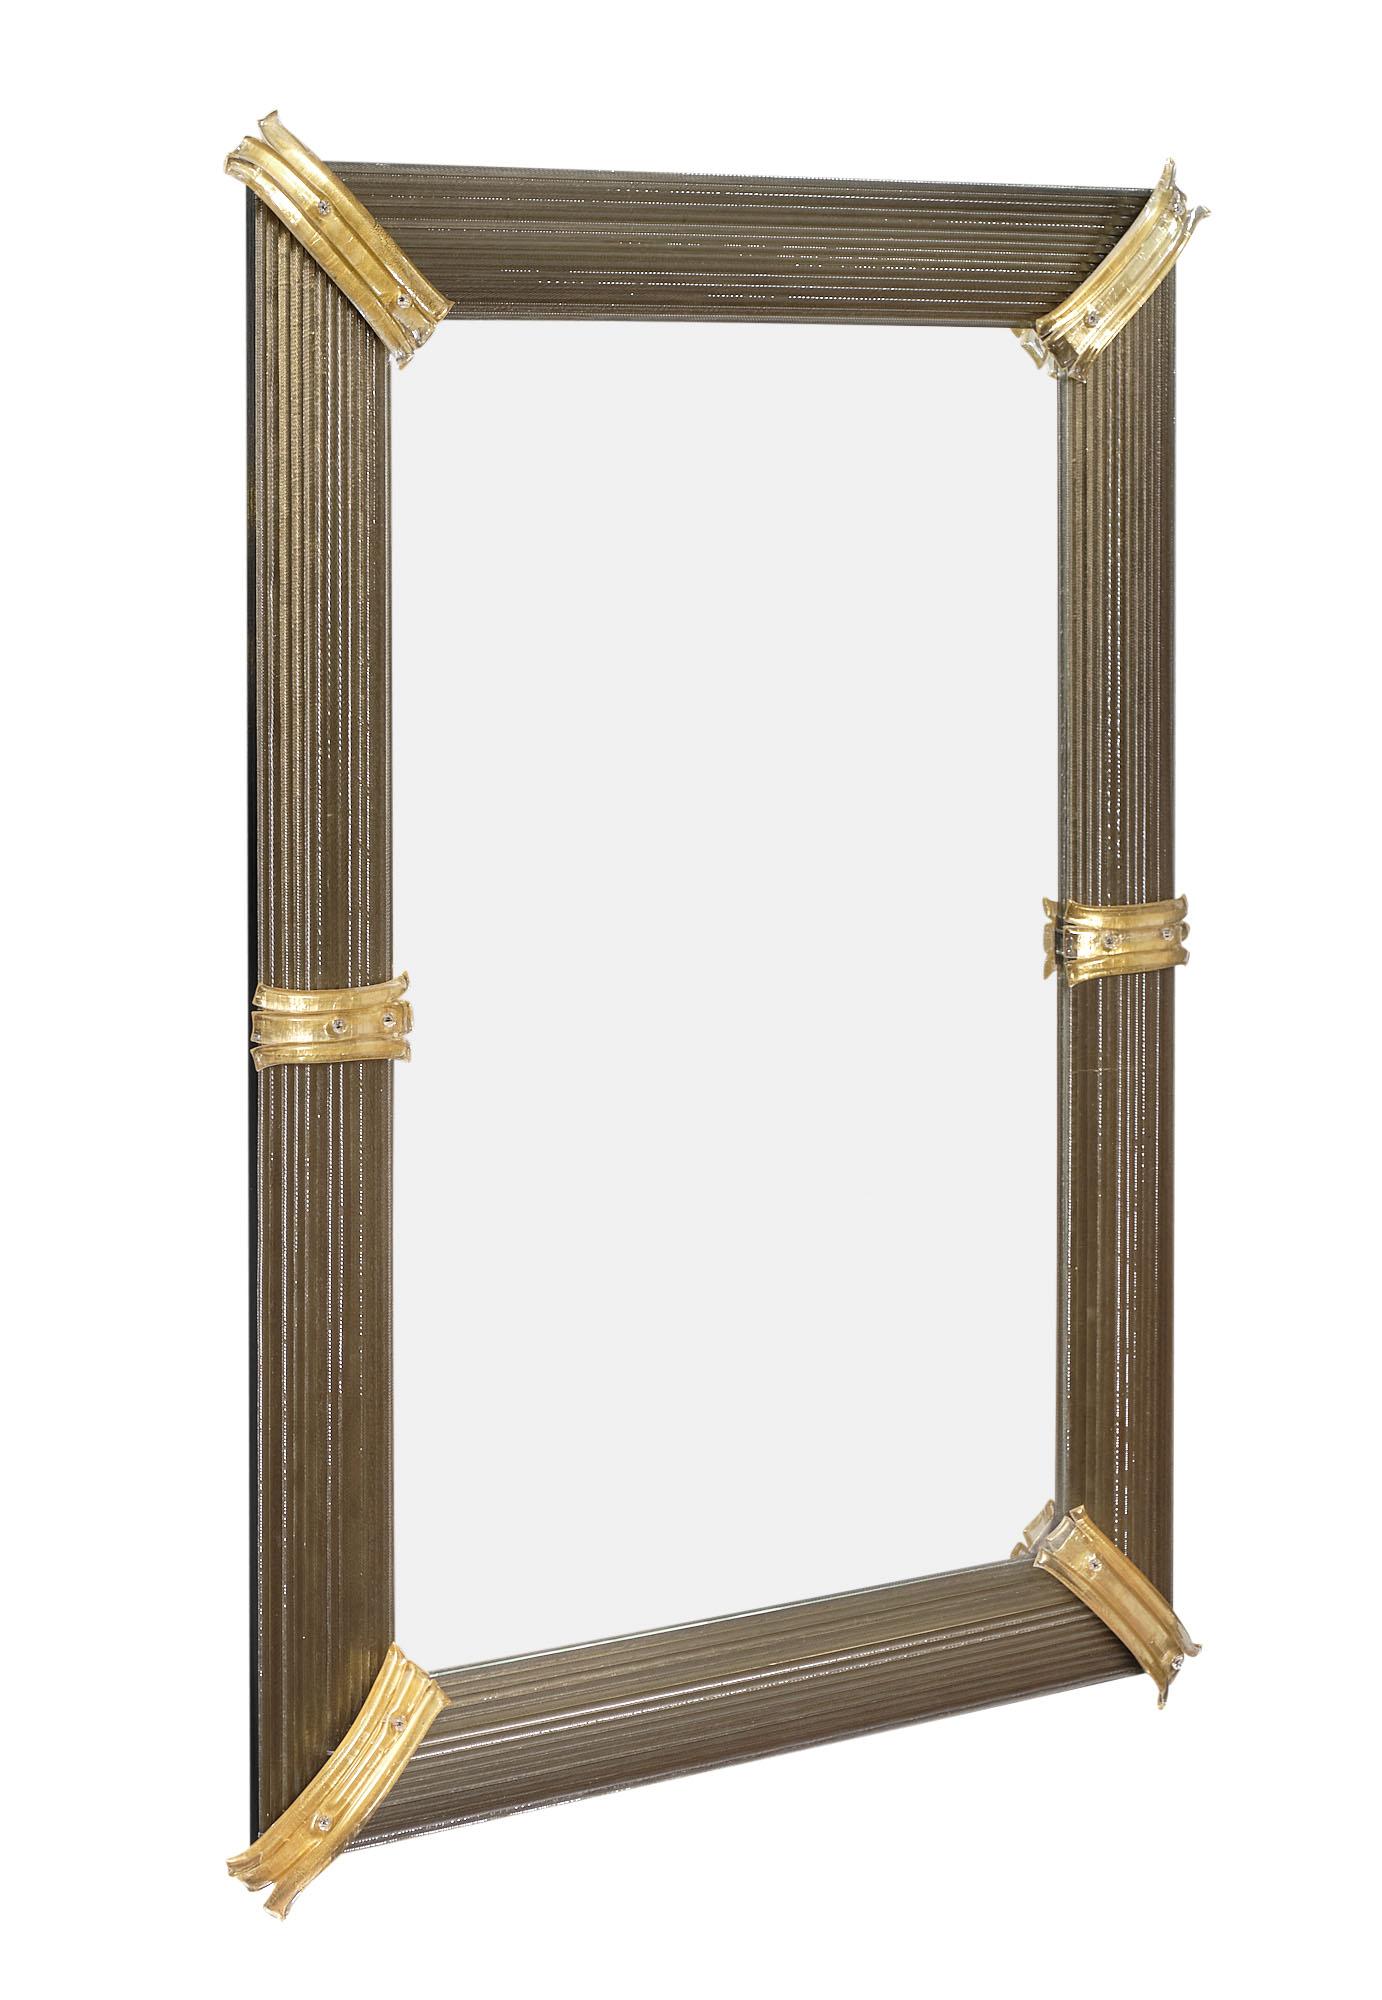 Mirror from Murano, Italy featuring multiple gray glass rods tied together to form a frame. Each corner is enhanced with a 24 carat gold fused piece of glass with texture.

This piece is currently a special order from Italy, please reach out for a